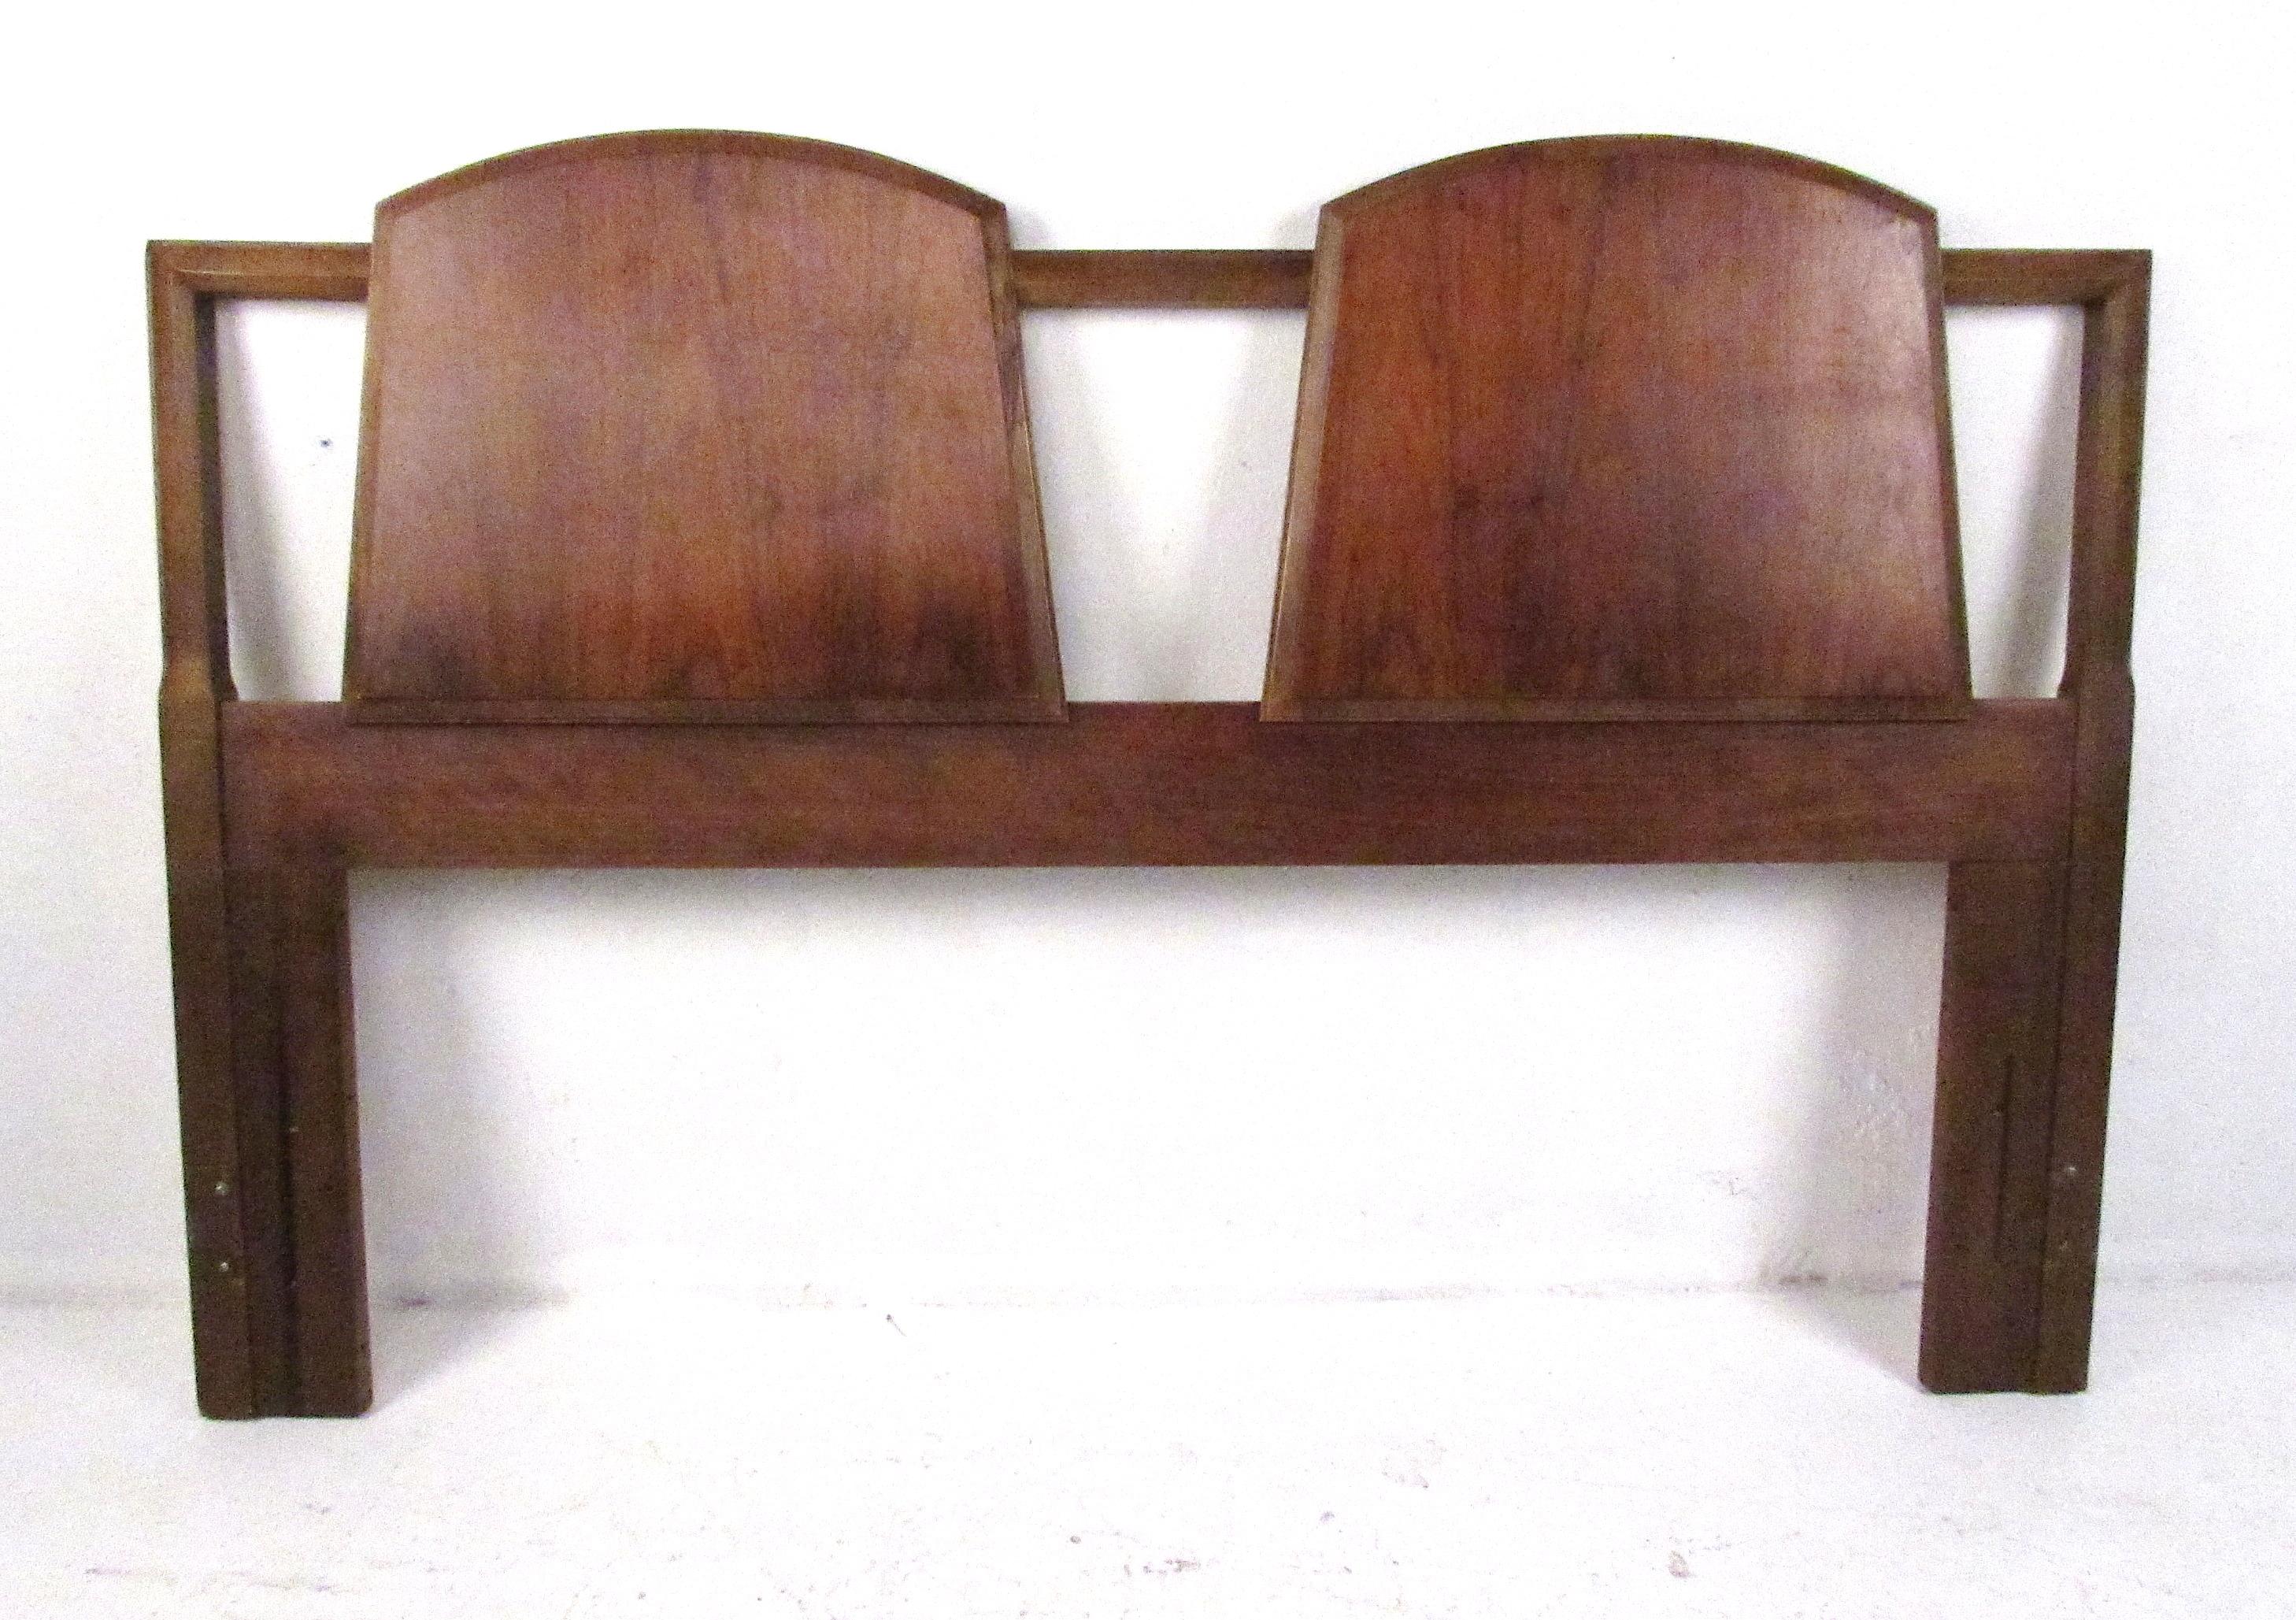 Midcentury walnut headboard by Lane Furniture. Please confirm item location (NY or NJ) with dealer.